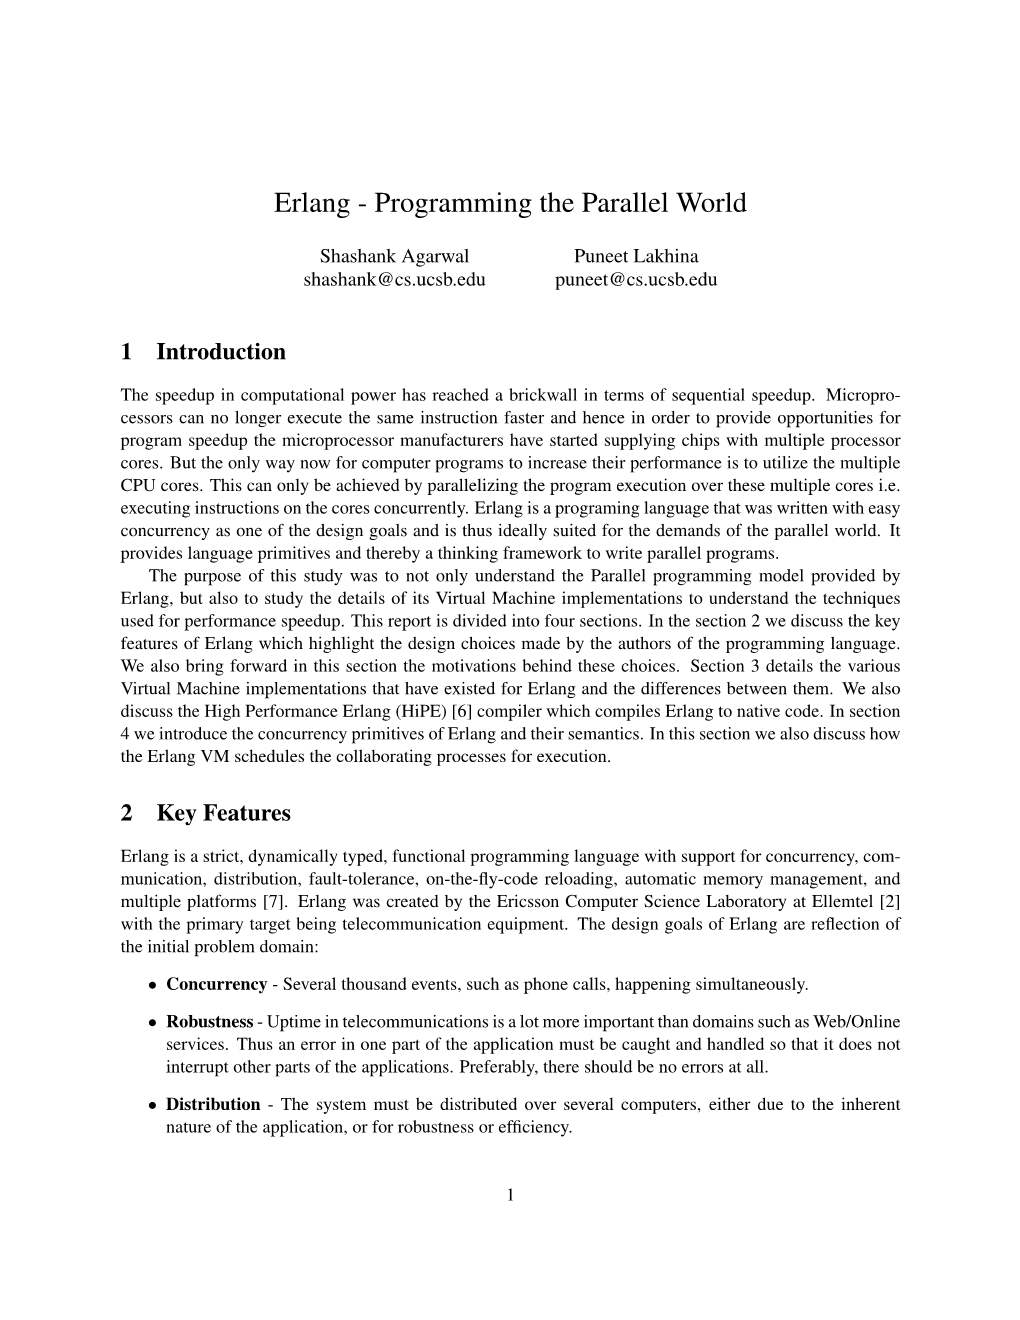 Erlang - Programming the Parallel World